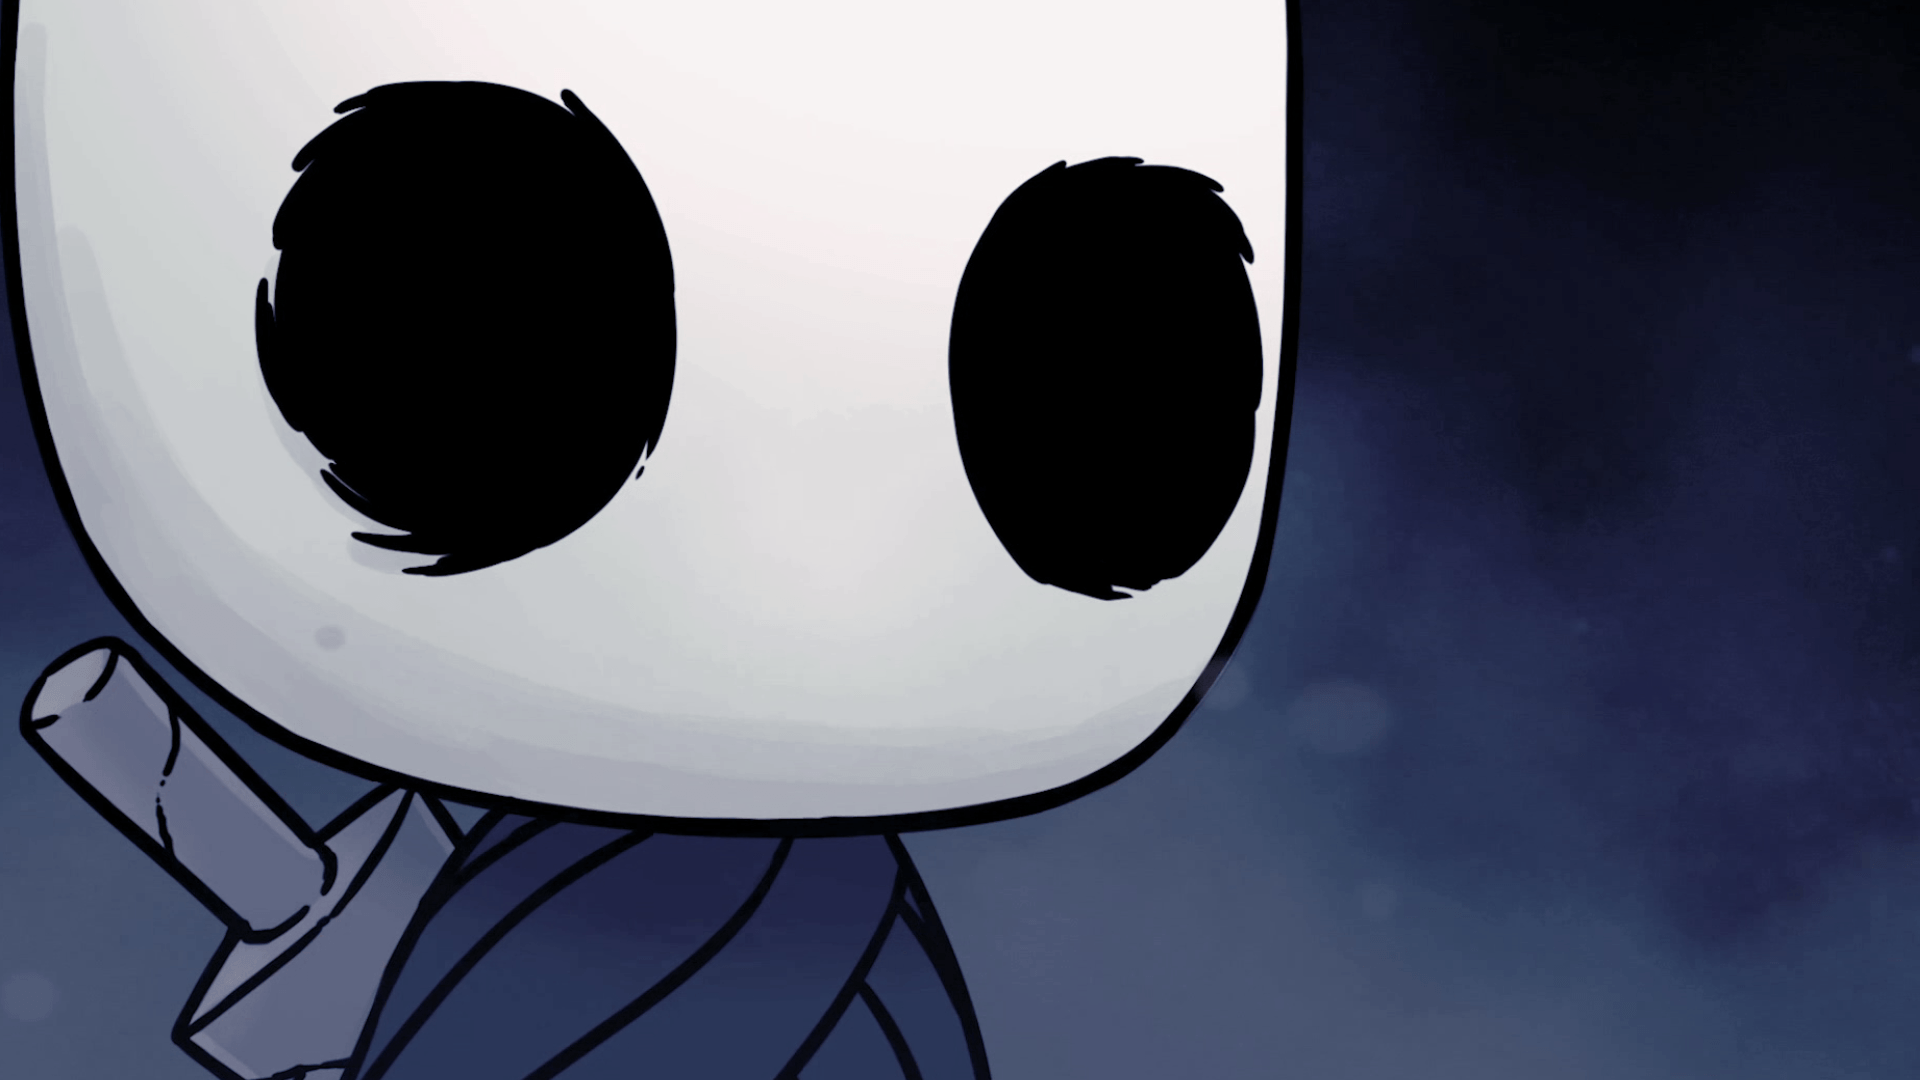 Game Hollow Knight Wallpaper. iCon Wallpaper HD